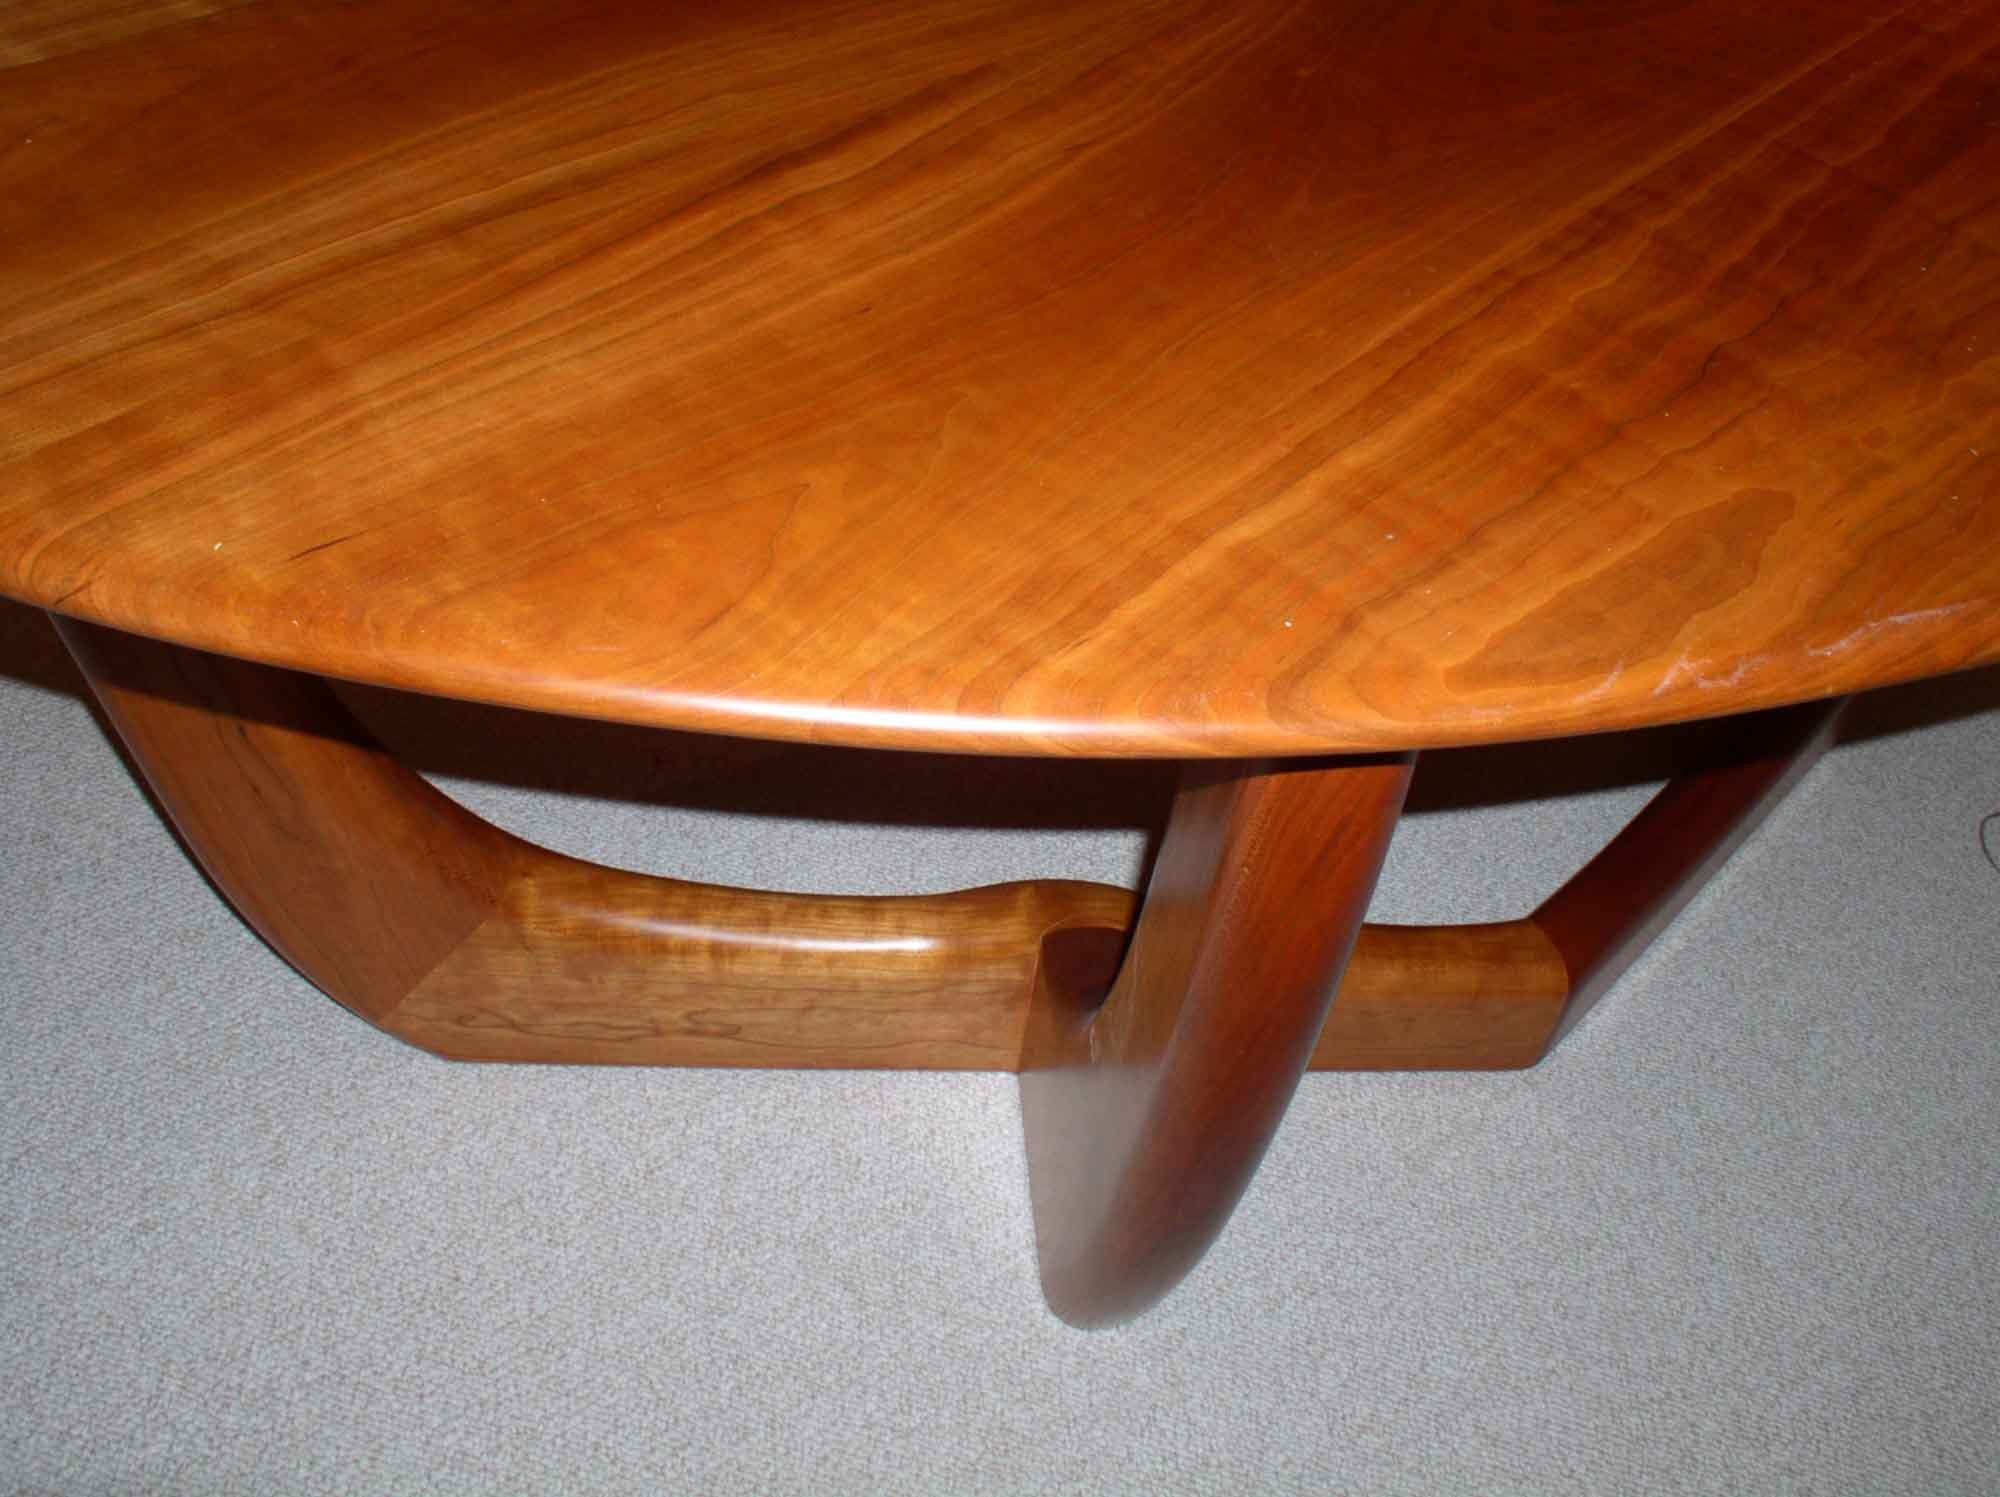 Dining Table - Cherry